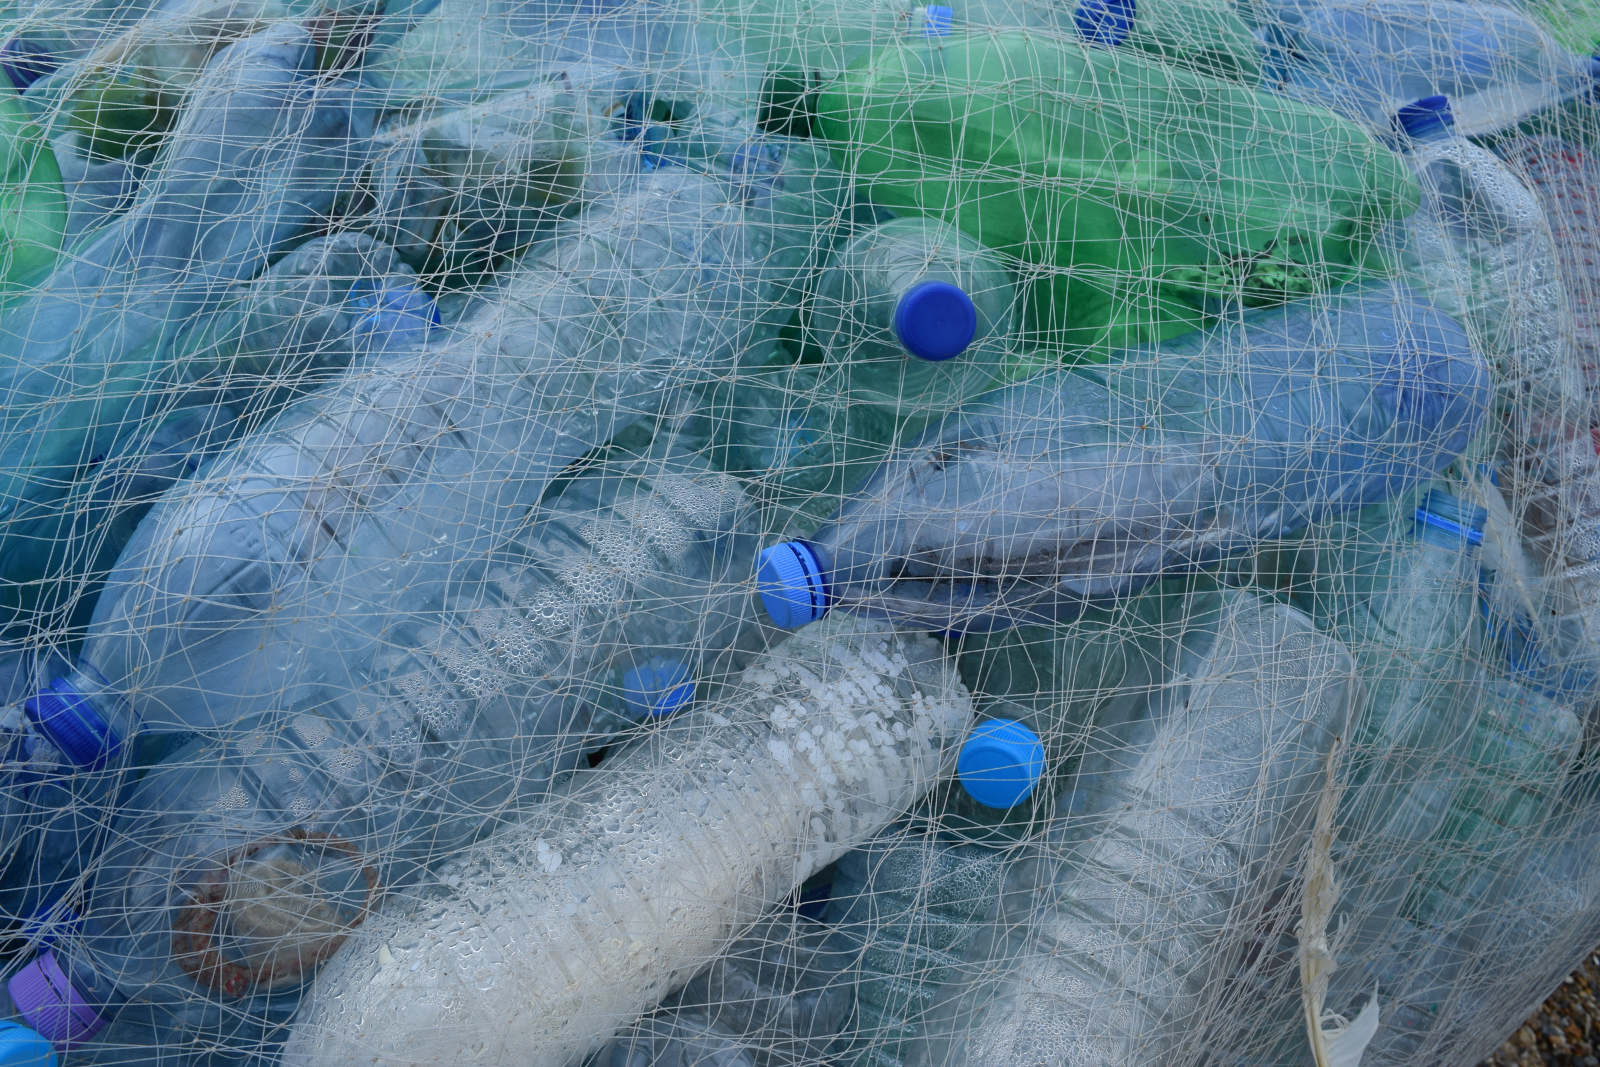 Image shows discarded plastic bottles in a plastic net.